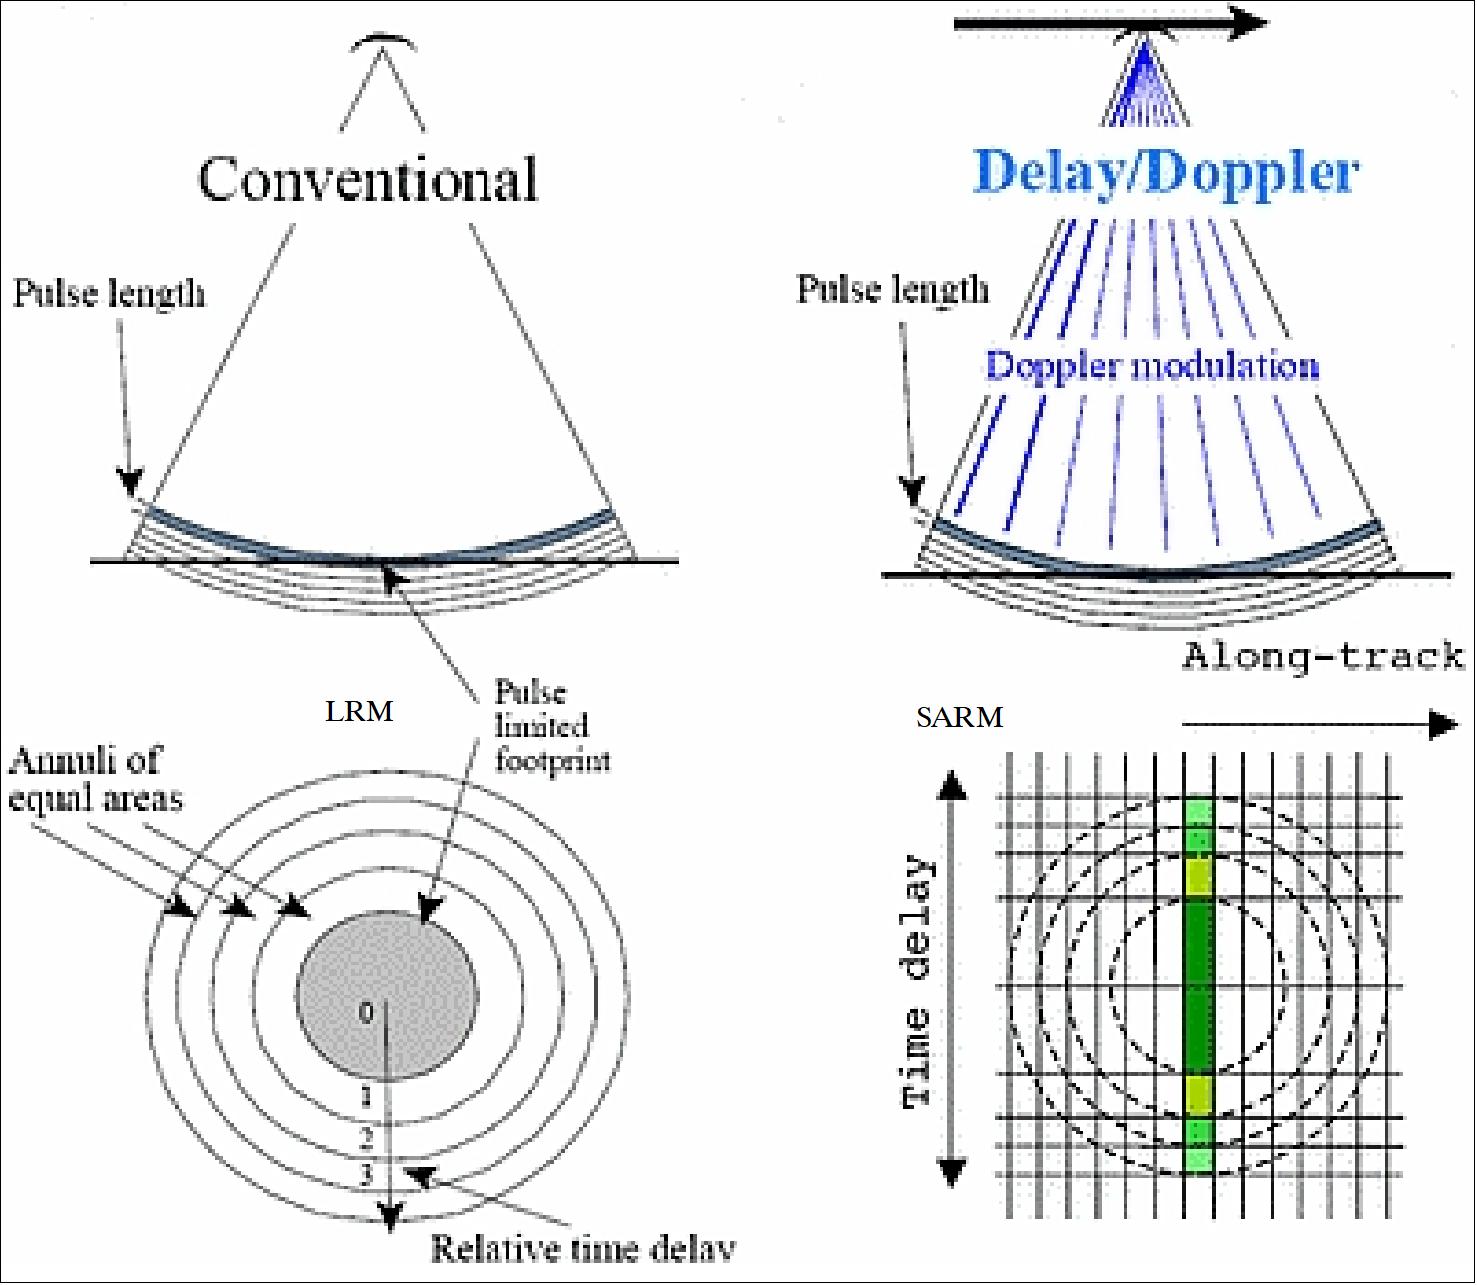 Figure 100: Schematic view of conventional LRM operations (left) and Delay-Doppler SARM operations of SIRAL (right), image credit: R. K. Raney, JHU/APL